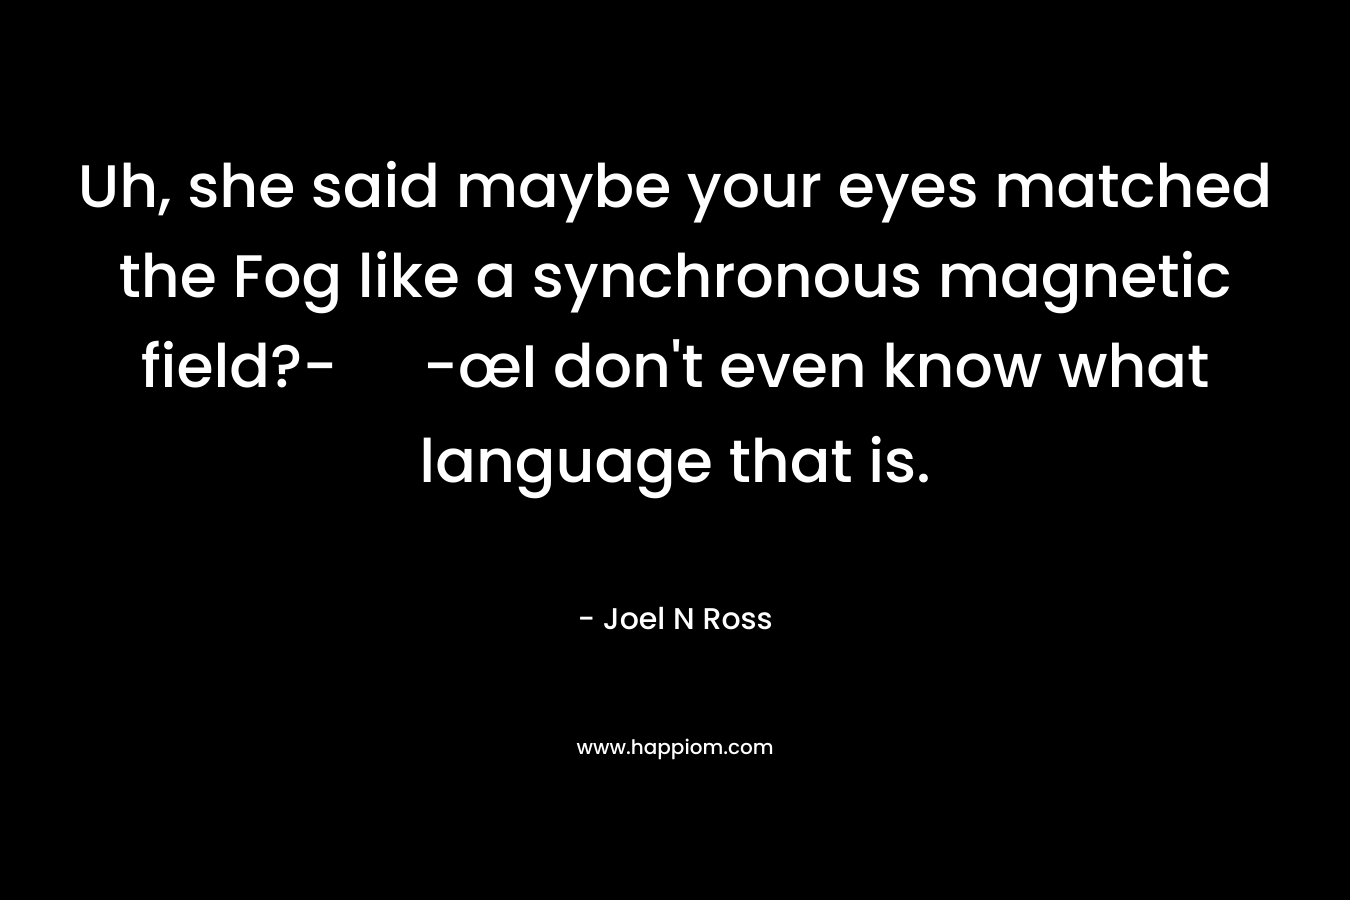 Uh, she said maybe your eyes matched the Fog like a synchronous magnetic field?- -œI don't even know what language that is.